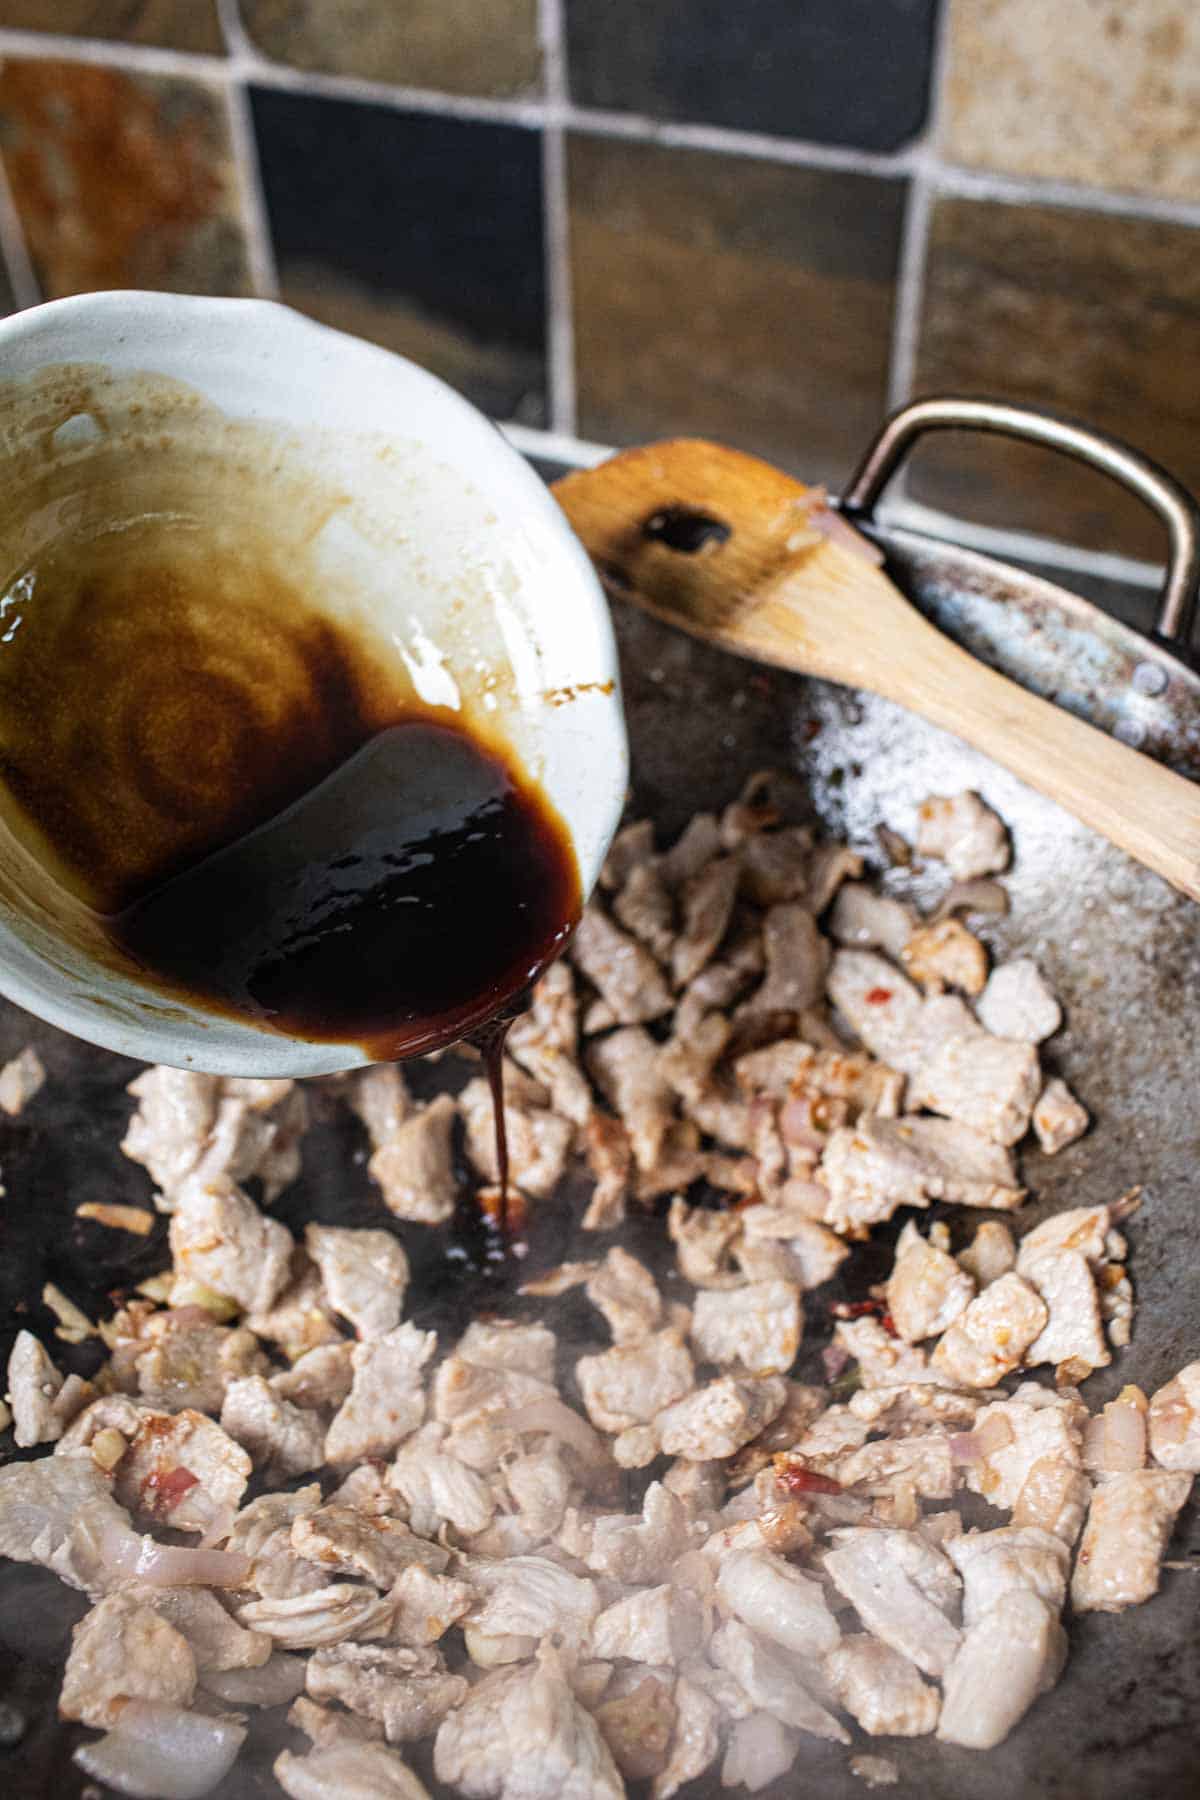 Sauce pouring into a wok with cooked meat.